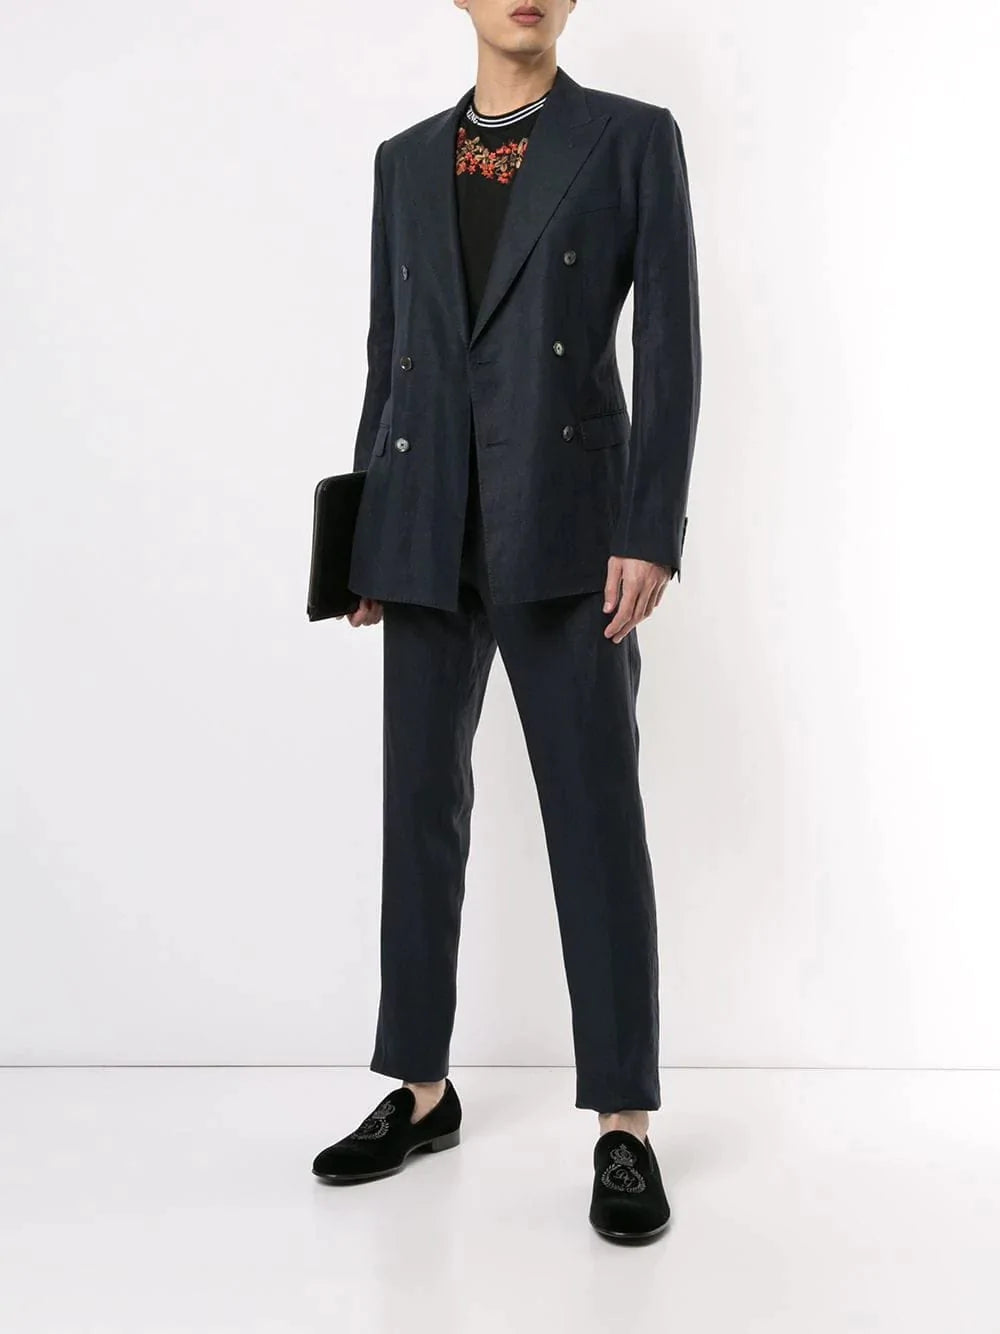 Dolce & Gabbana Double-Breasted Suit Jacket